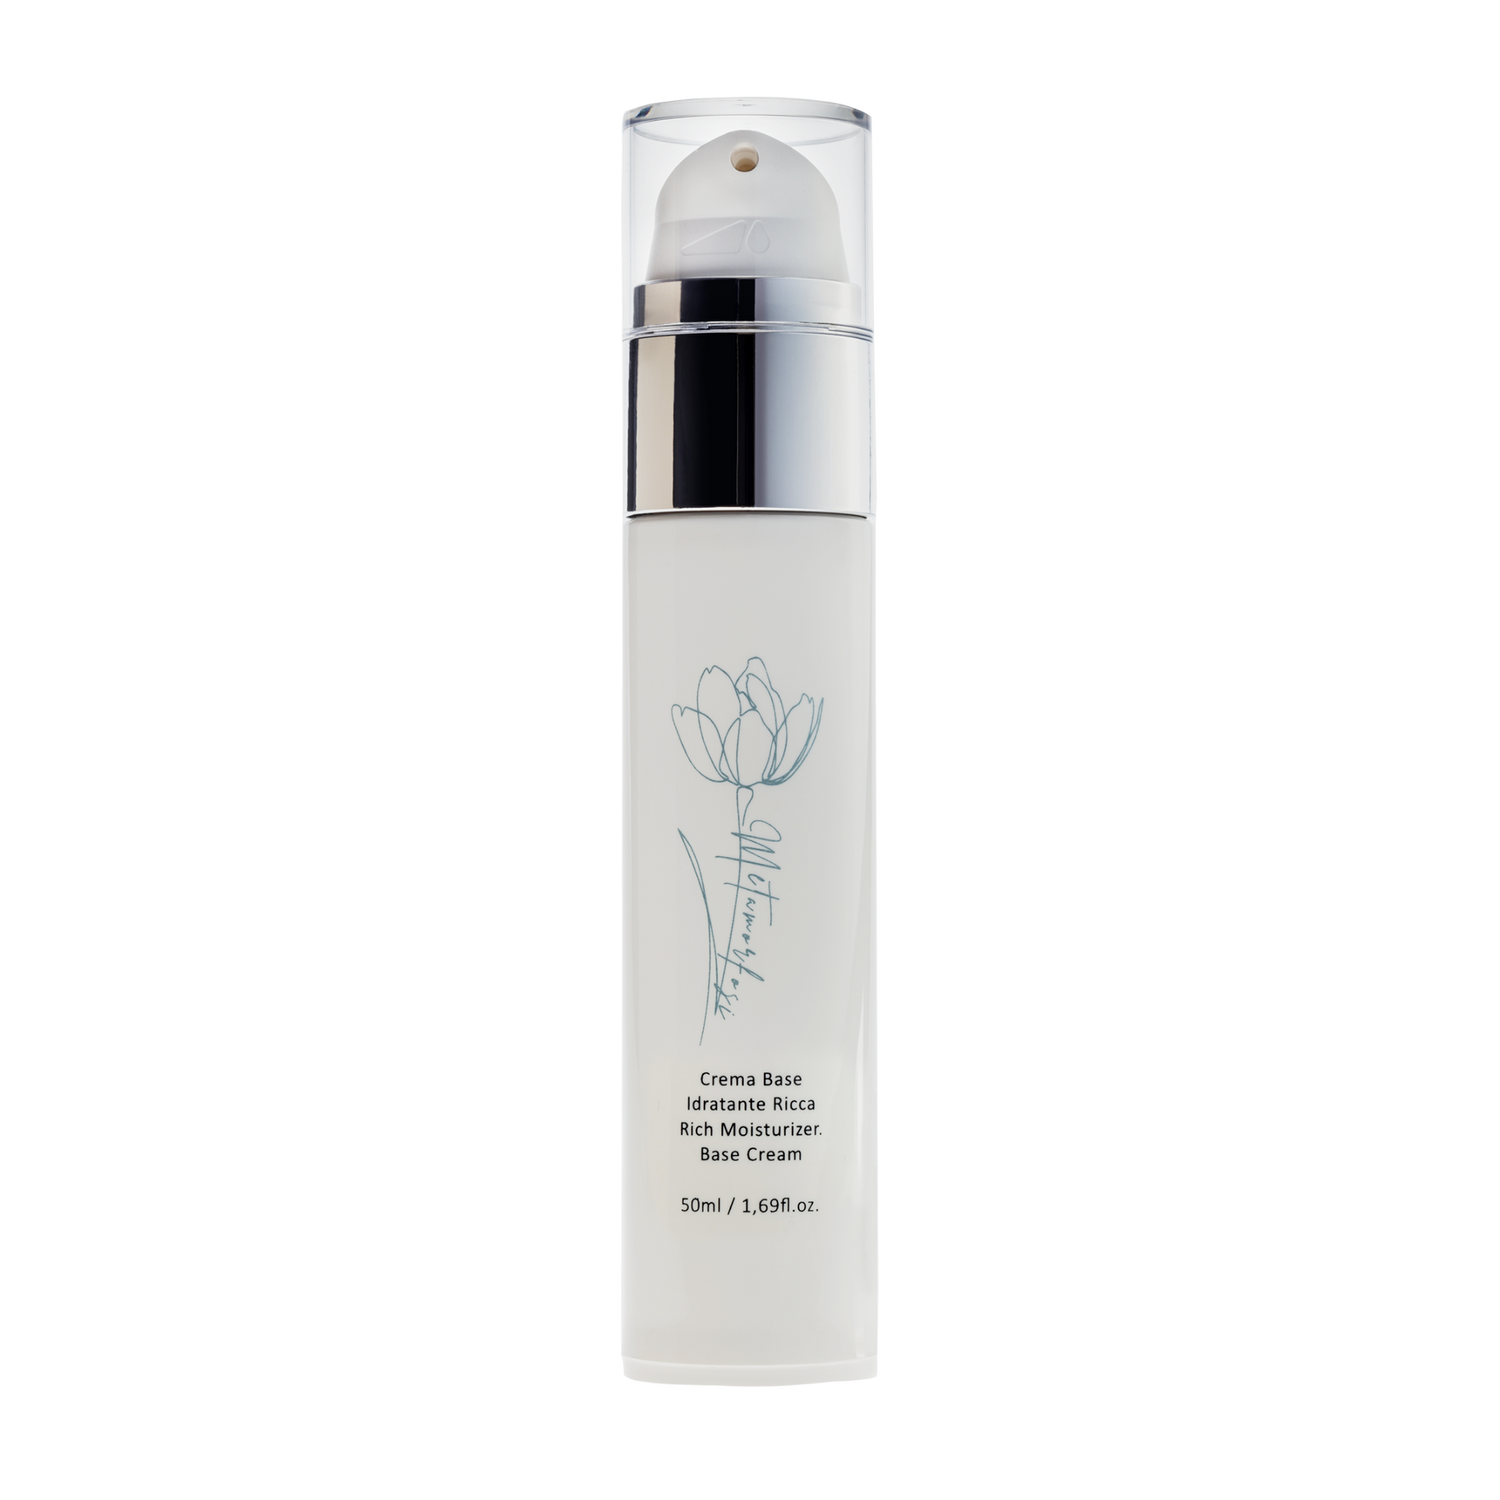 50ml airless bottle with hyaluronic acid rich moisturizer by Metamorfosi Skincare, Made In Italy